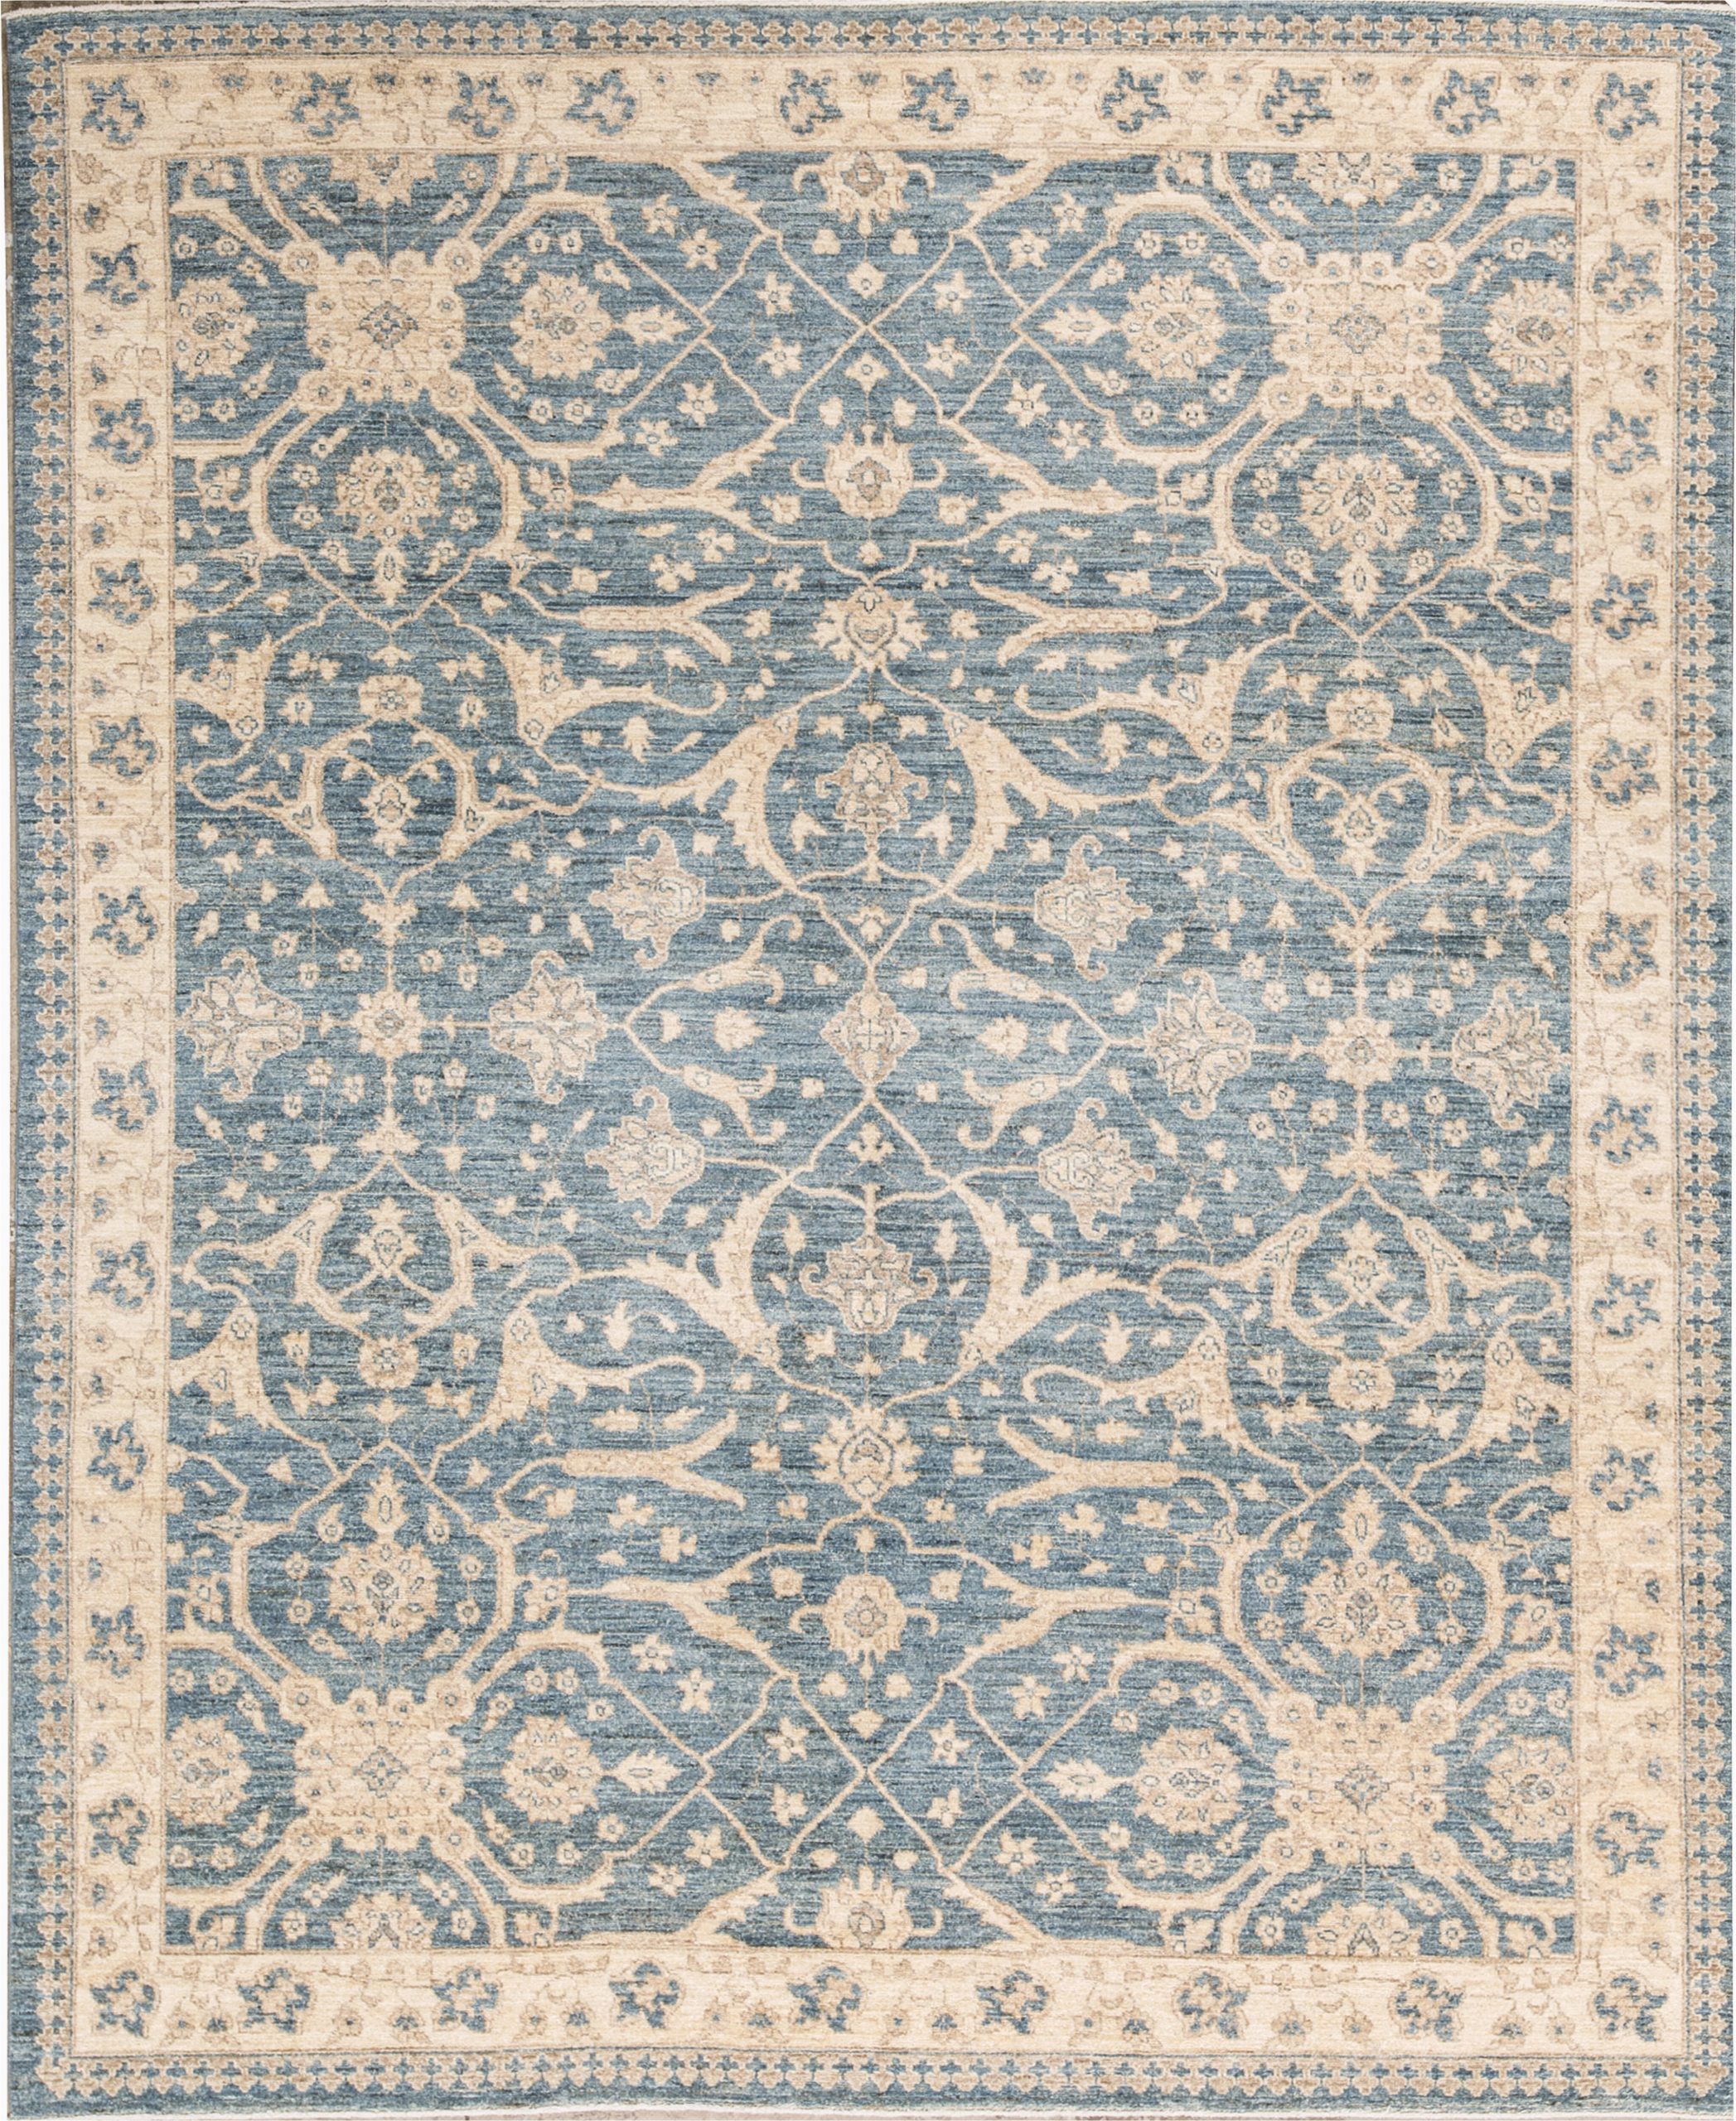 Blue and Cream oriental Rug Sultanabad oriental Hand Knotted Wool Light Blue Cream area Rug